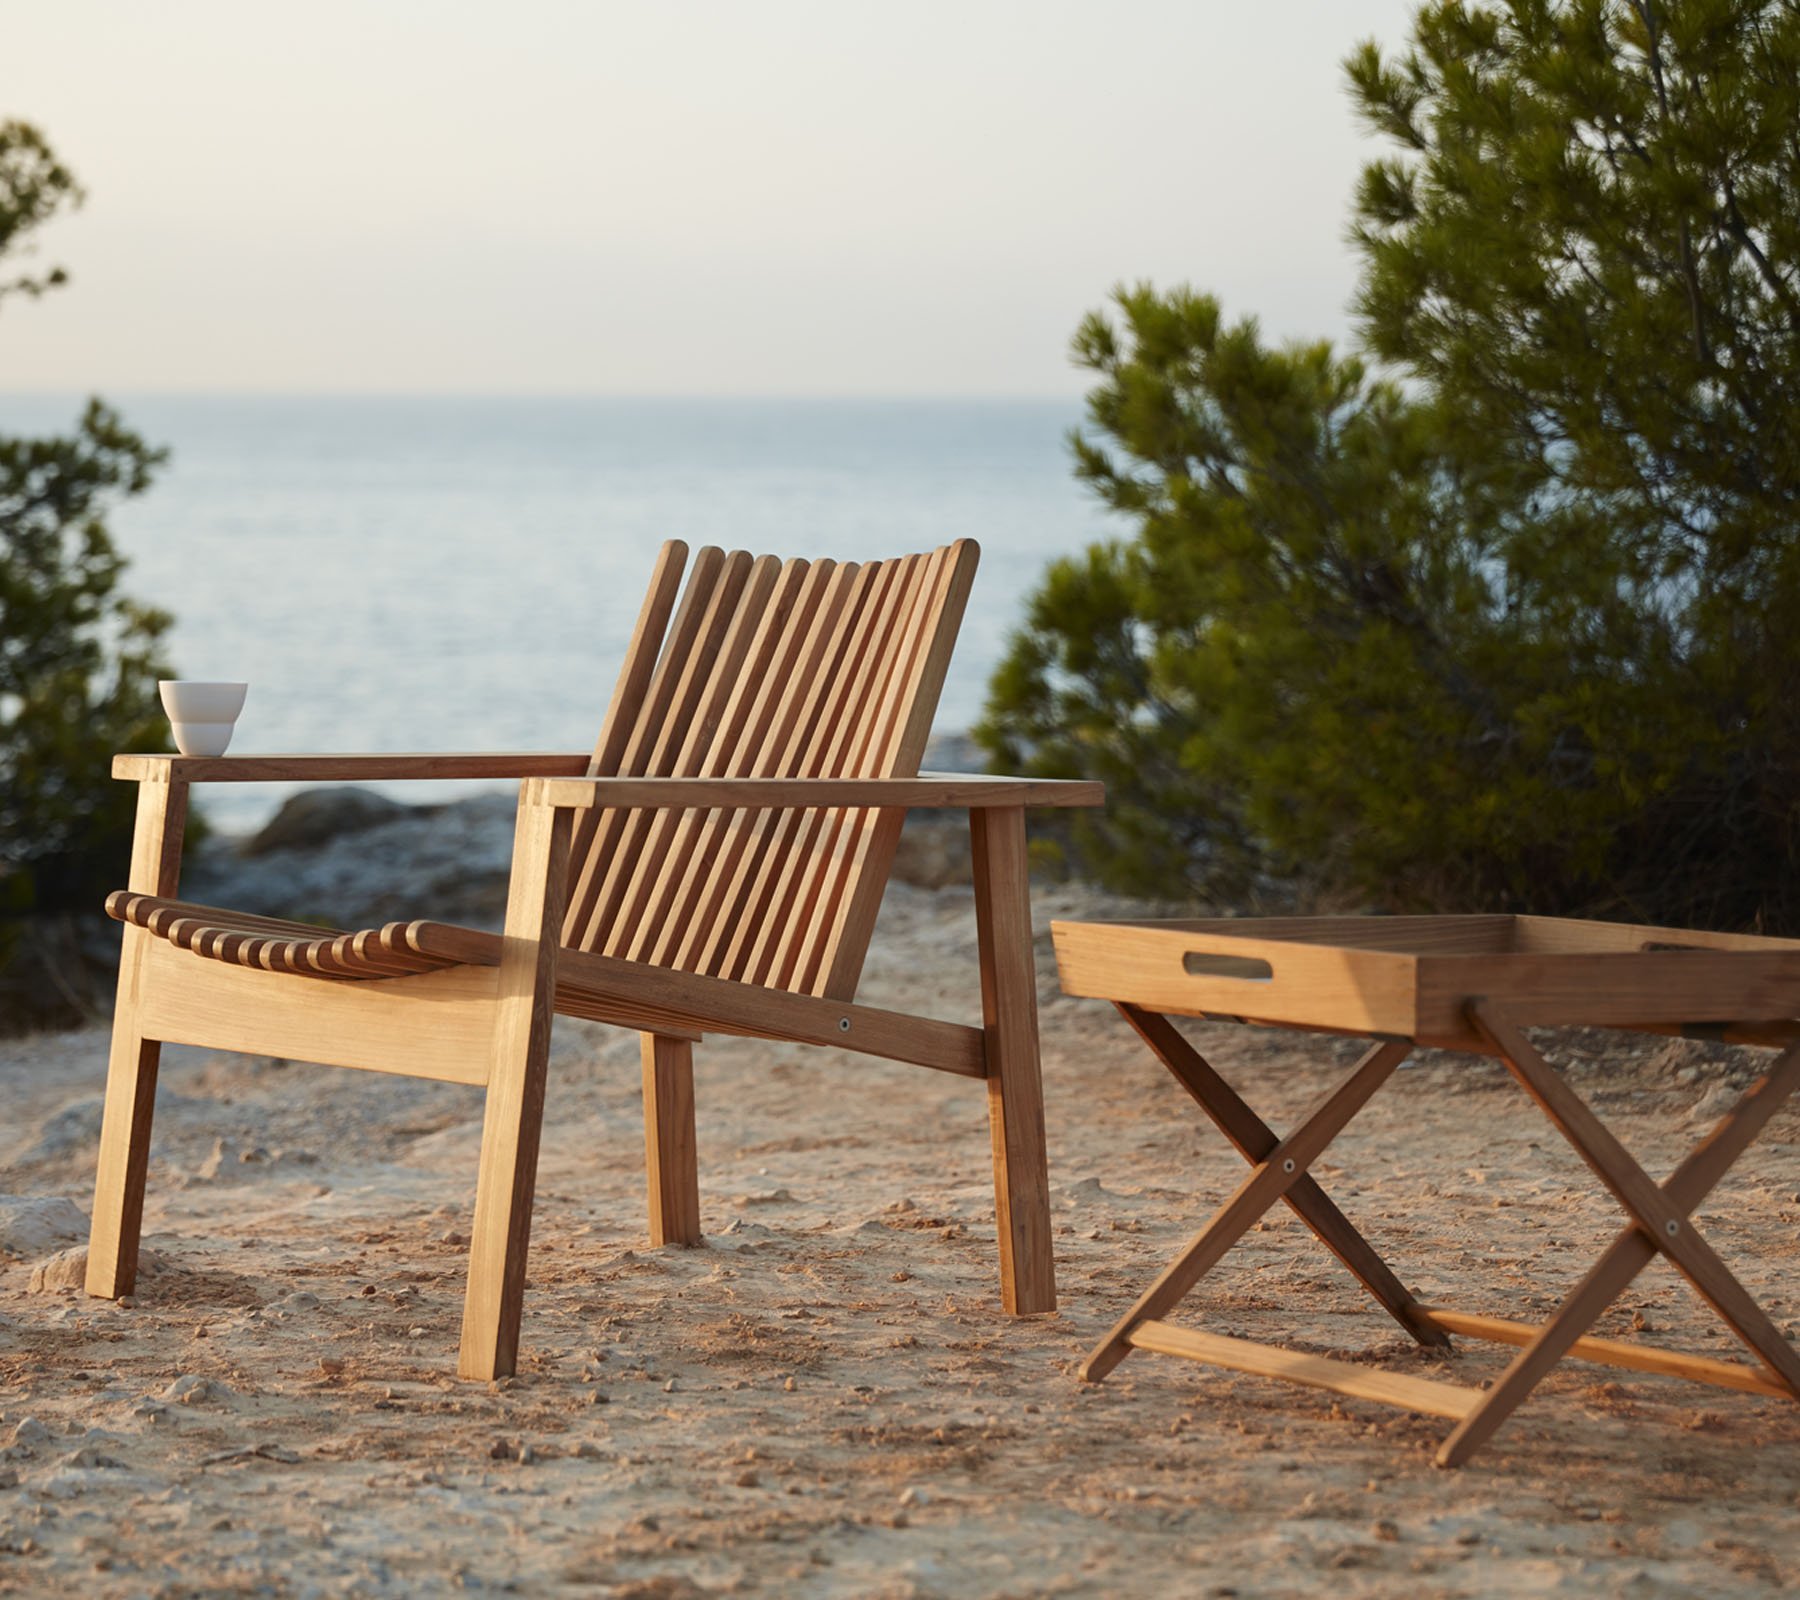 Cane-line Amaze Lounge Chair | Wooden | Outdoor-Patio Furniture - Ultra ...